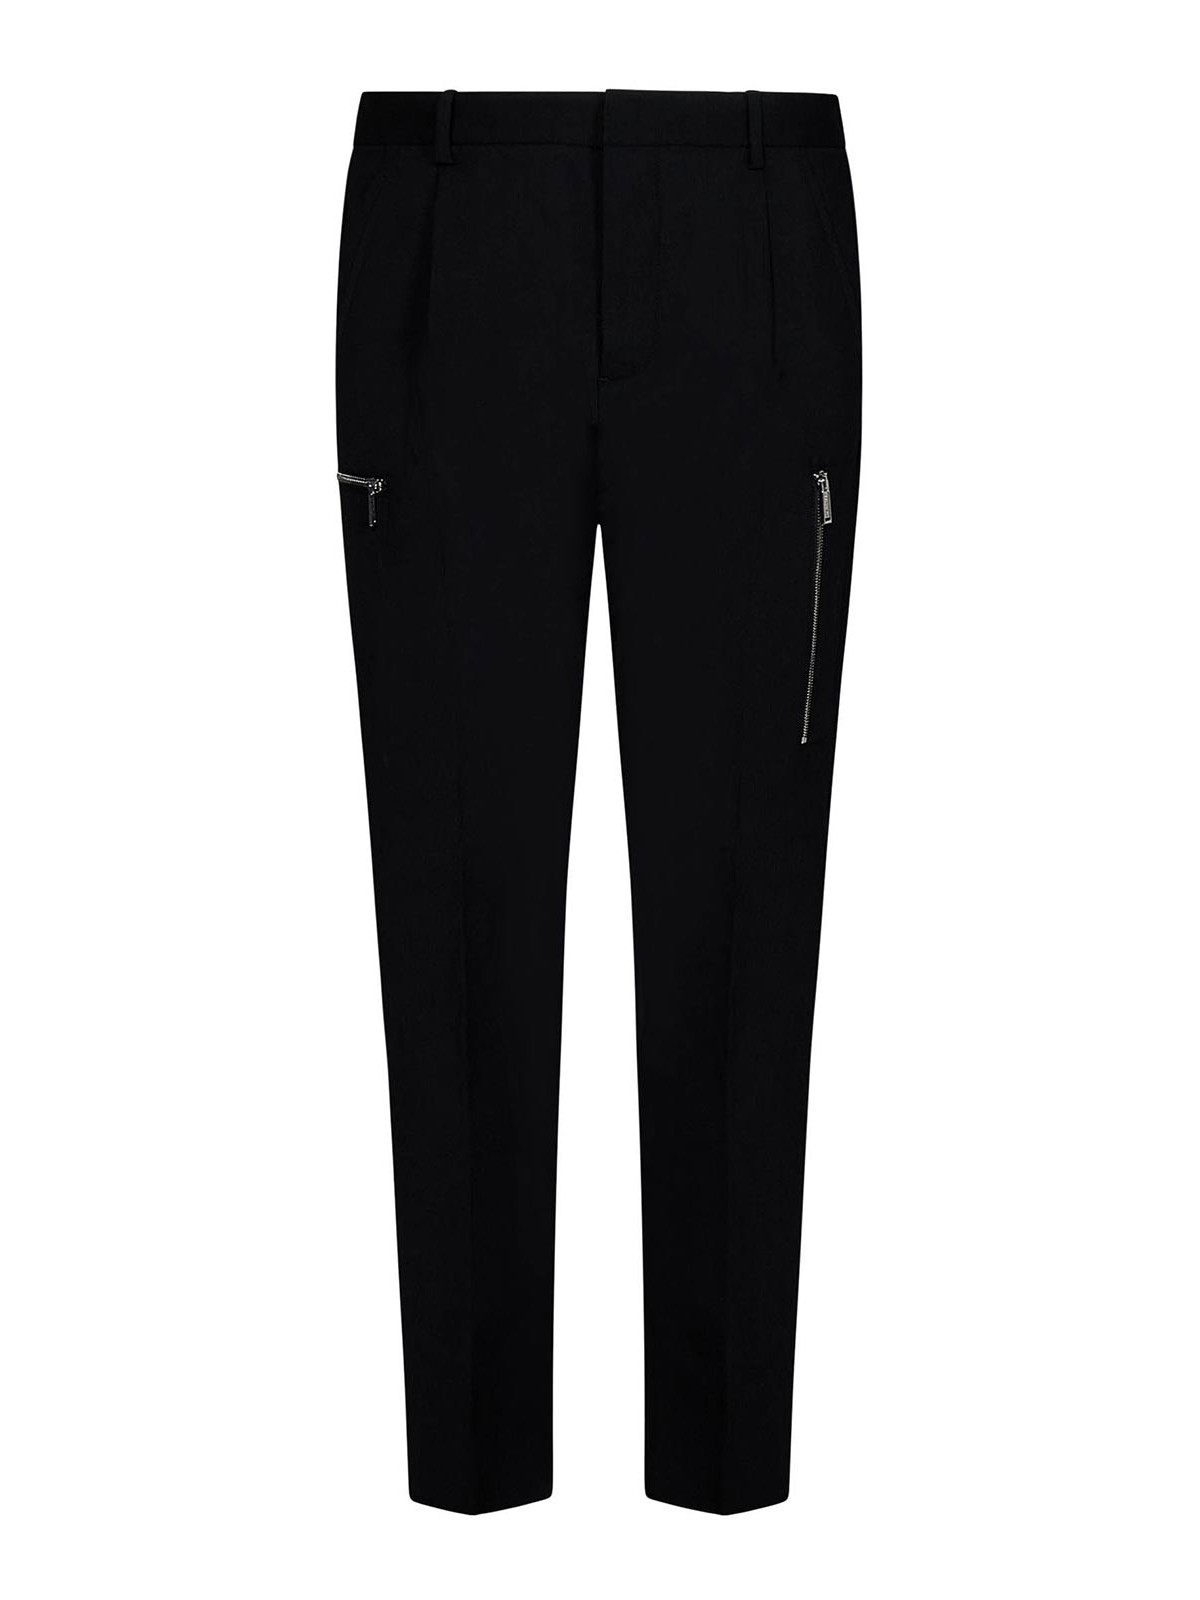 Buy Dickies Redhawk Men's Action Trousers with zip pockets